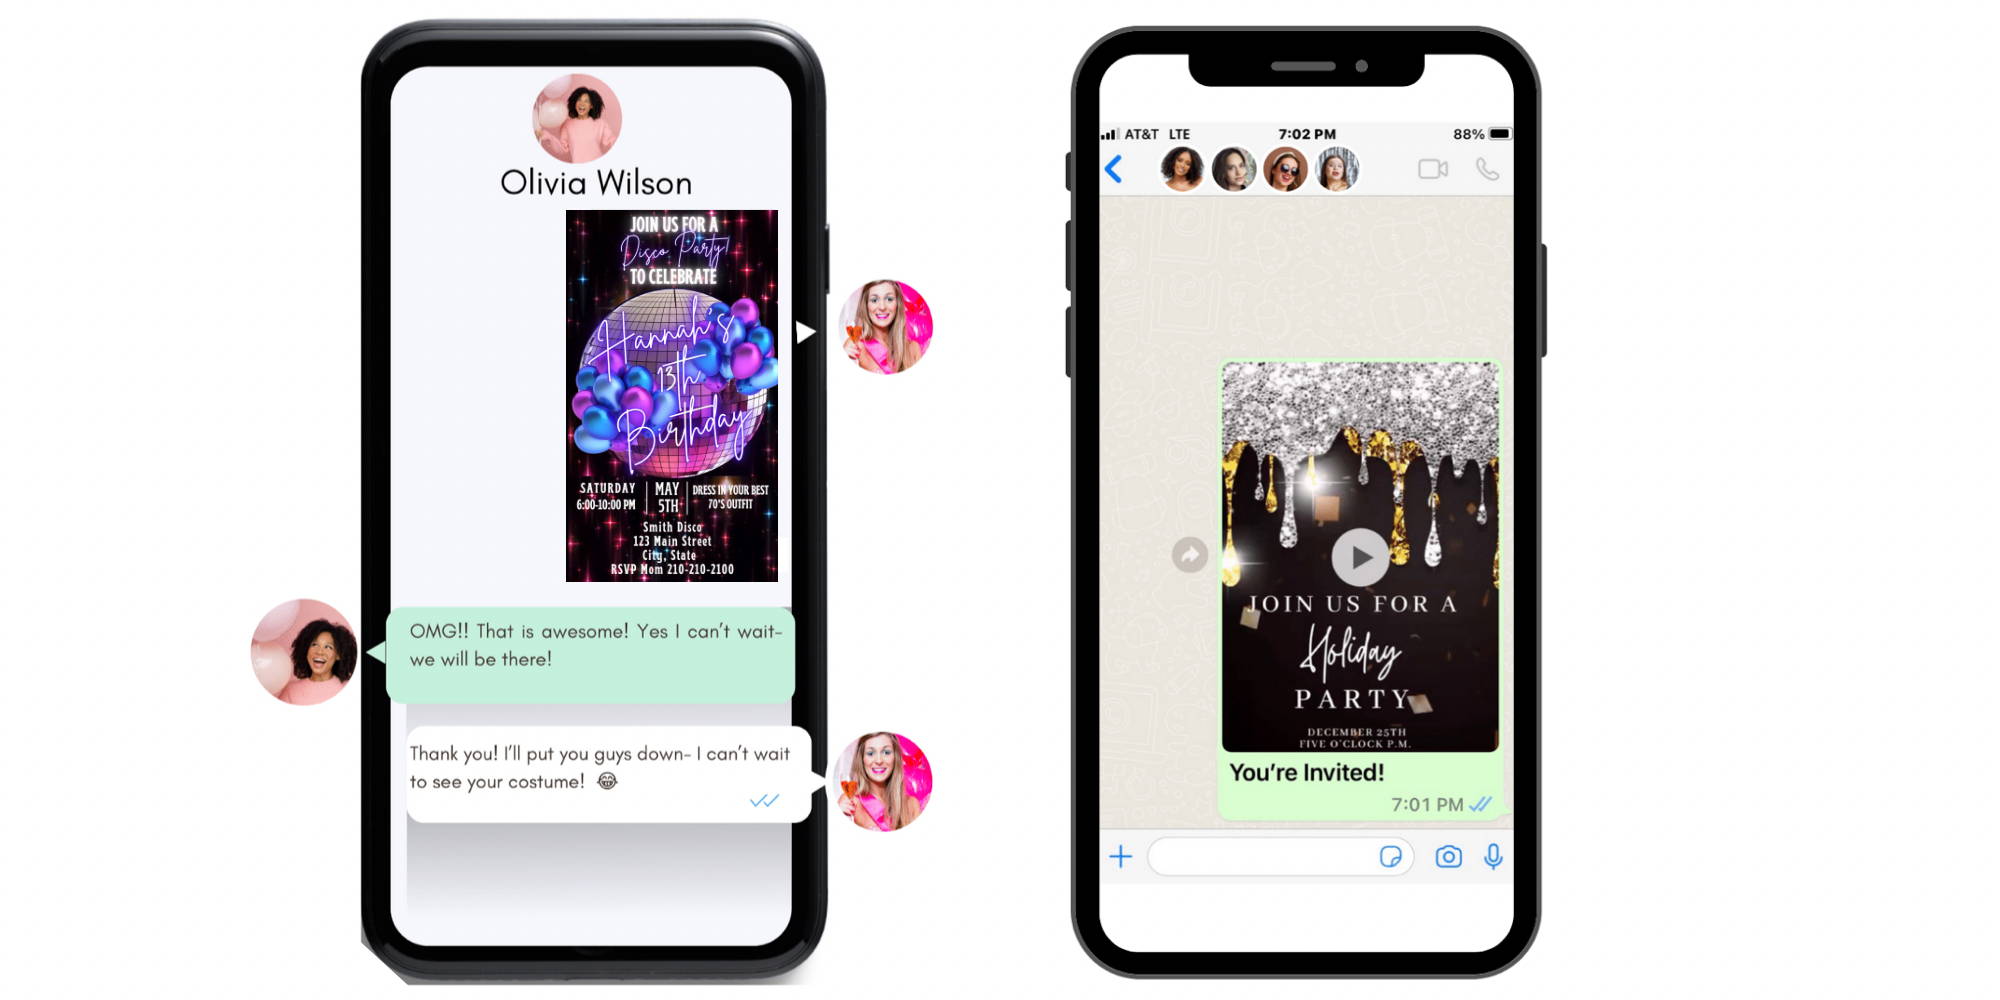 Shop thousands of editable video invitation templates that party guests love. With just one easy link, you can share your party invitation with unlimited guests via text, WhatsApp, email, etc. Plus, with easy intuitive editing tools, you'll have a blast editing your video invitation. 